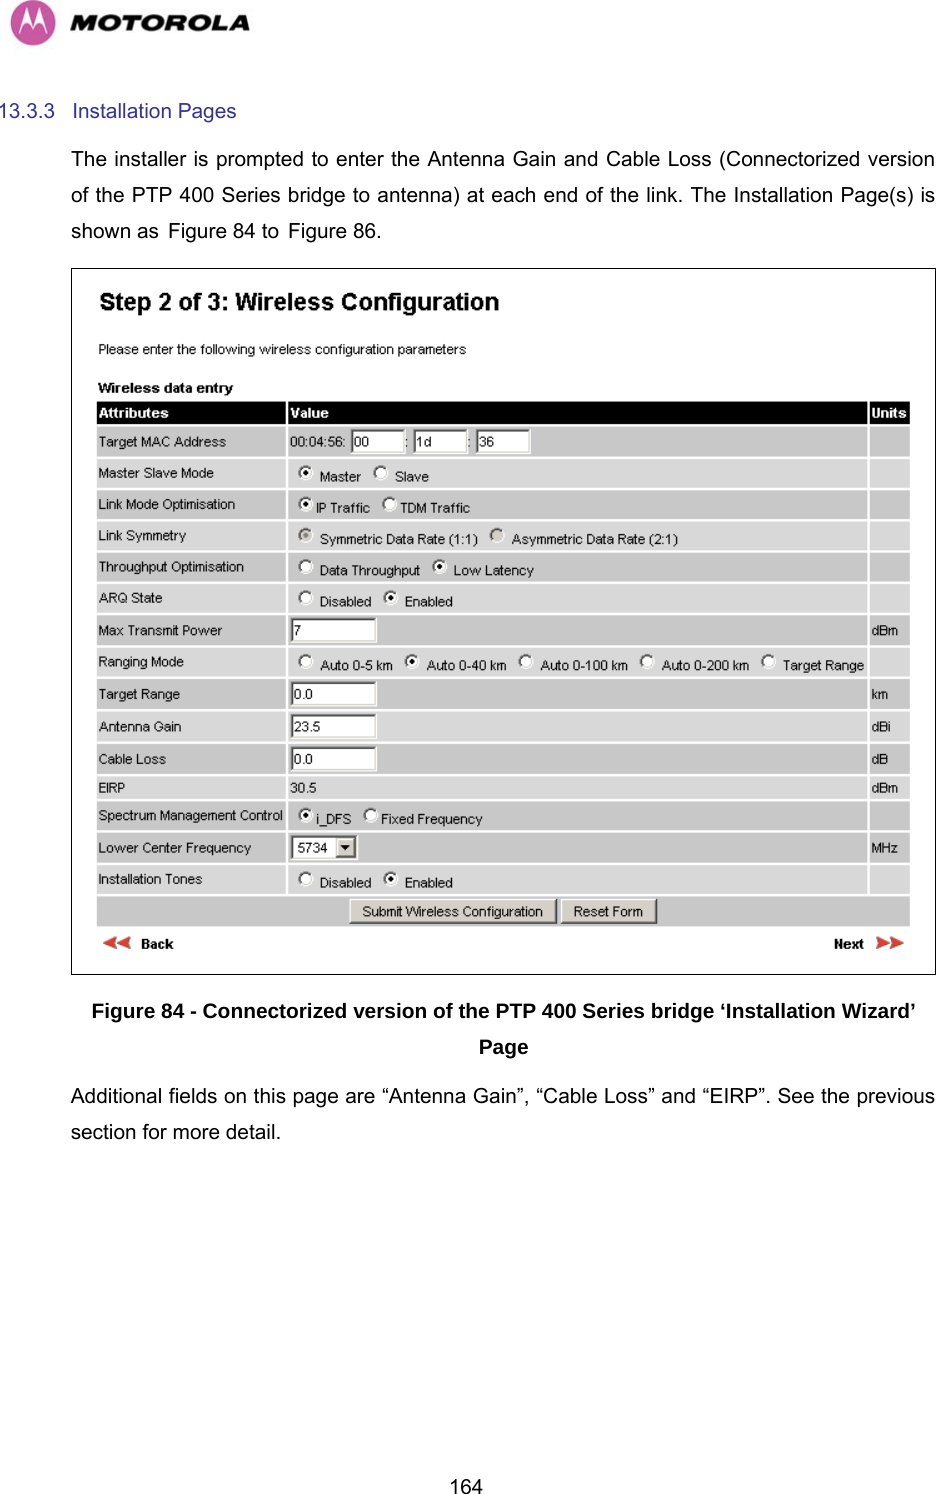   16413.3.3 Installation Pages The installer is prompted to enter the Antenna Gain and Cable Loss (Connectorized version of the PTP 400 Series bridge to antenna) at each end of the link. The Installation Page(s) is shown as HFigure 84 to HFigure 86.  Figure 84 - Connectorized version of the PTP 400 Series bridge ‘Installation Wizard’ Page Additional fields on this page are “Antenna Gain”, “Cable Loss” and “EIRP”. See the previous section for more detail. 